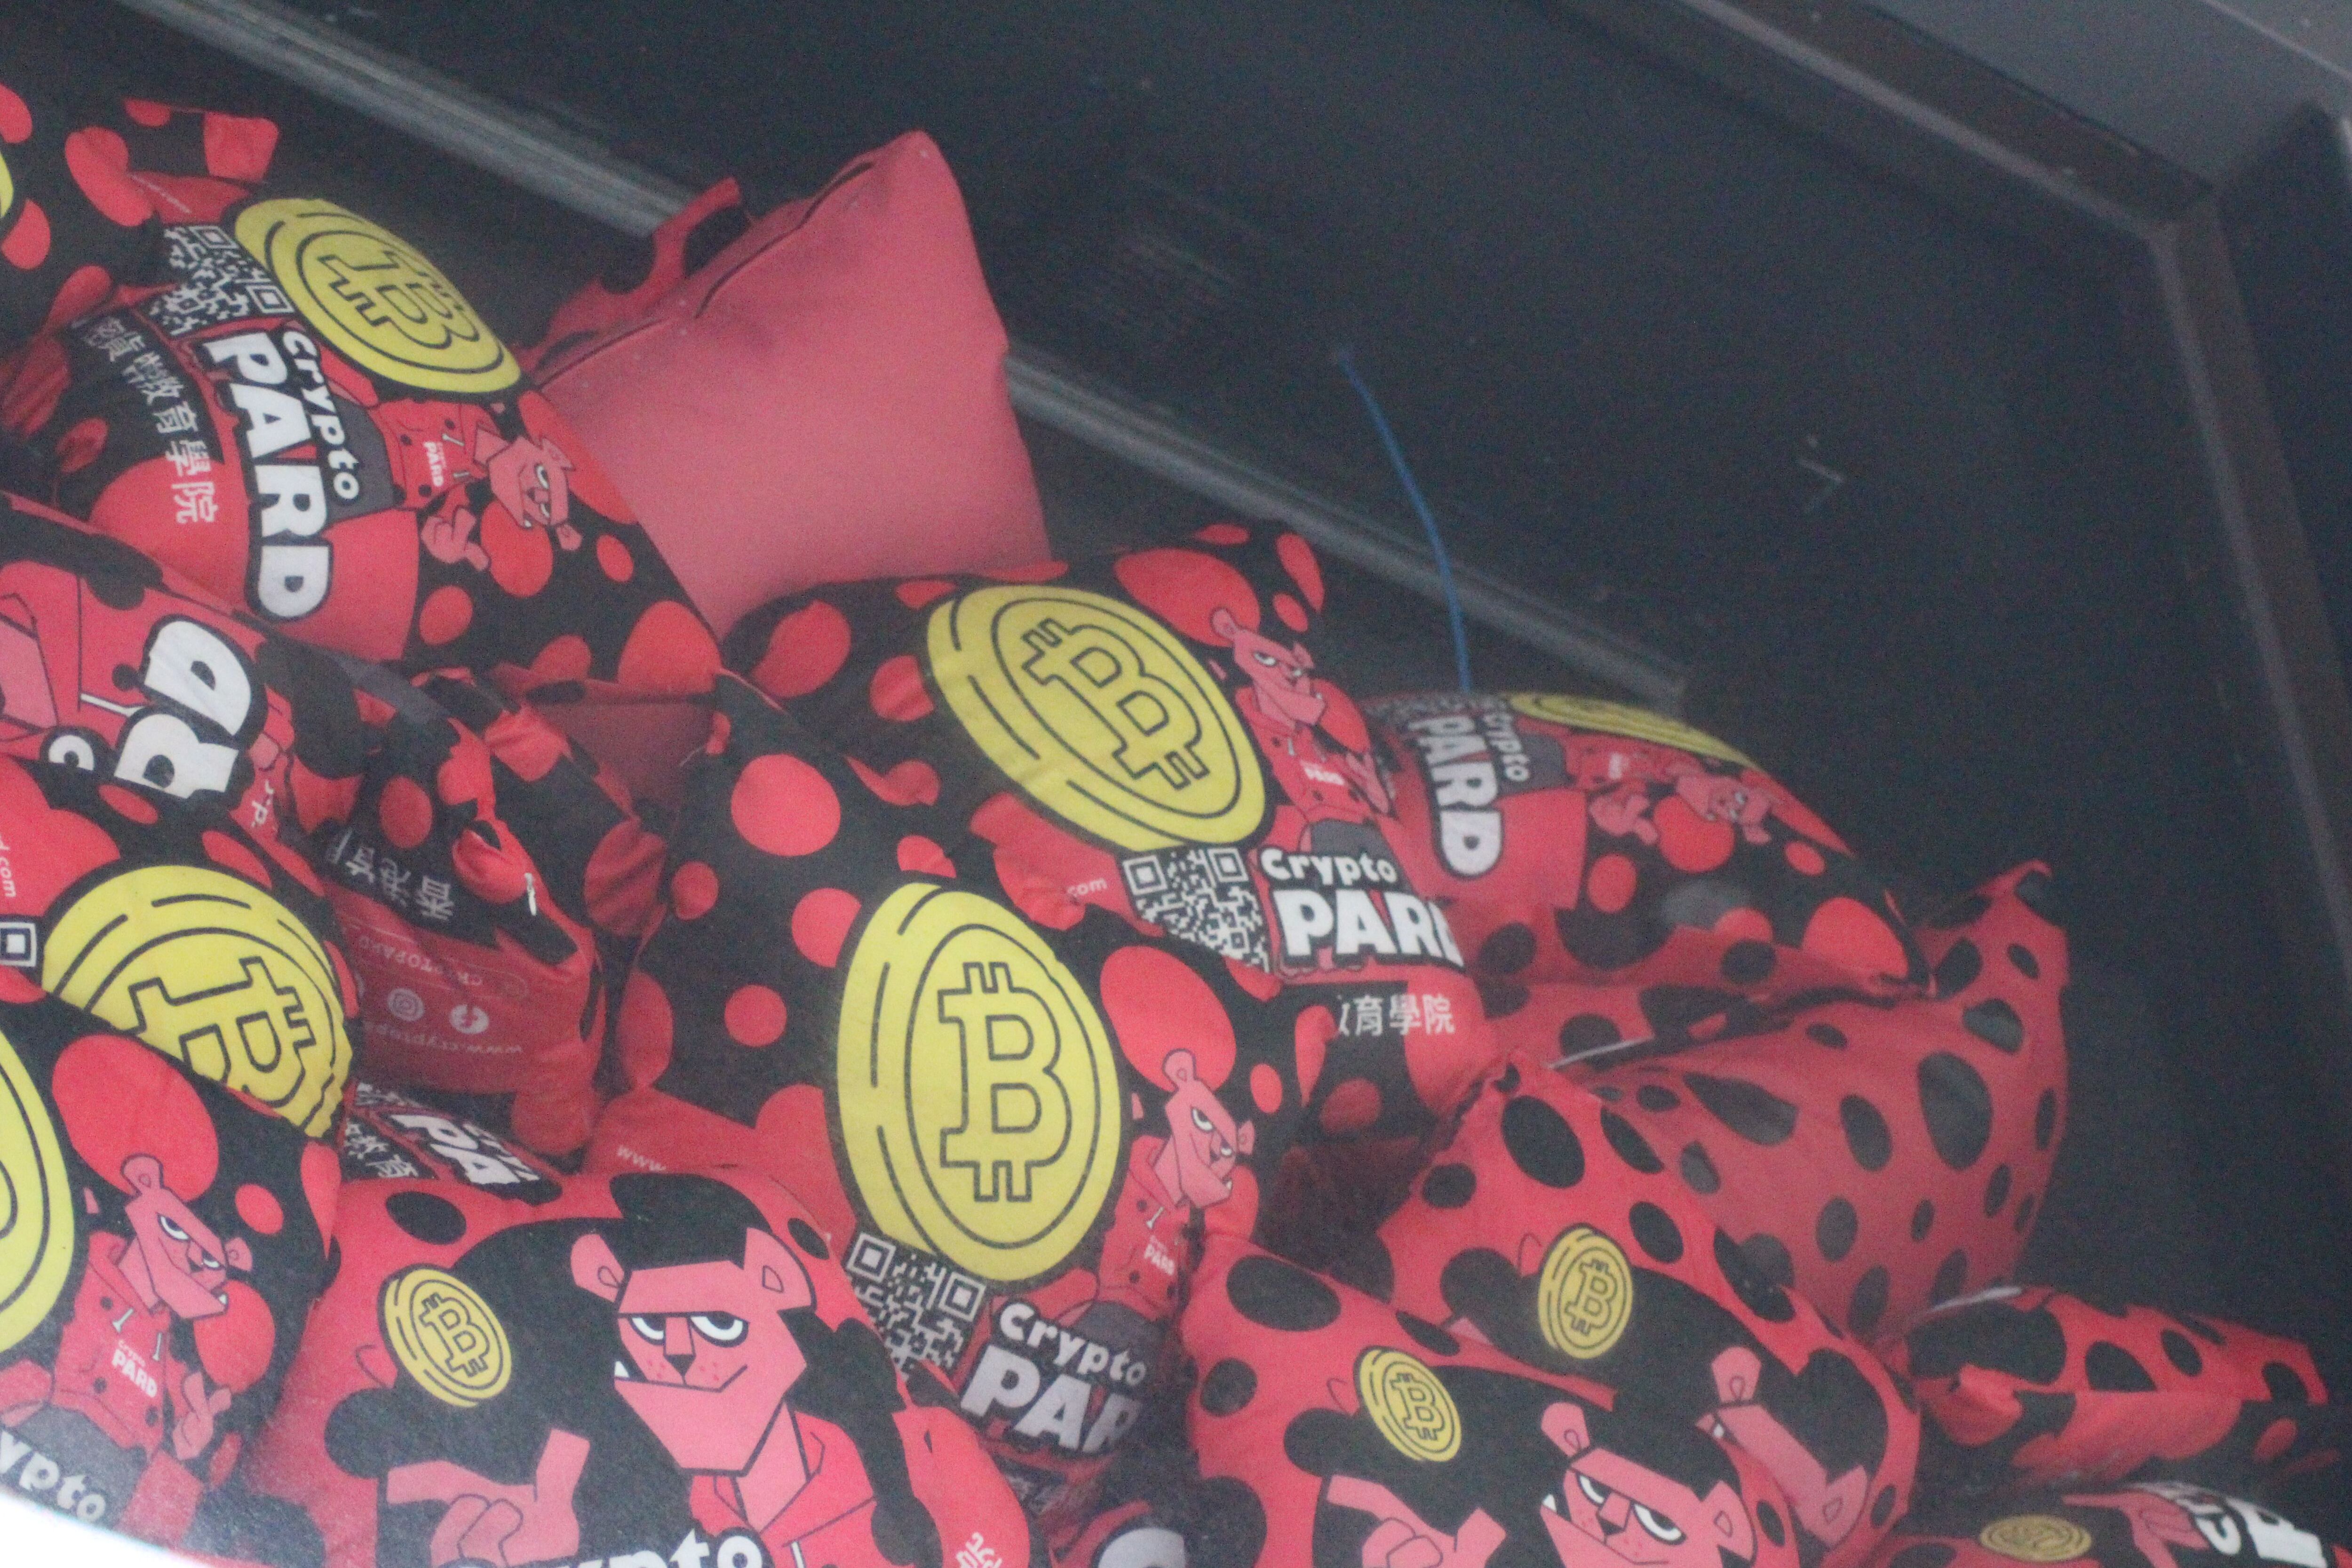 Months after closing, CryptoPard's cushions are still stacked in its shop window. Photocredit: Callan Quinn/ DL News